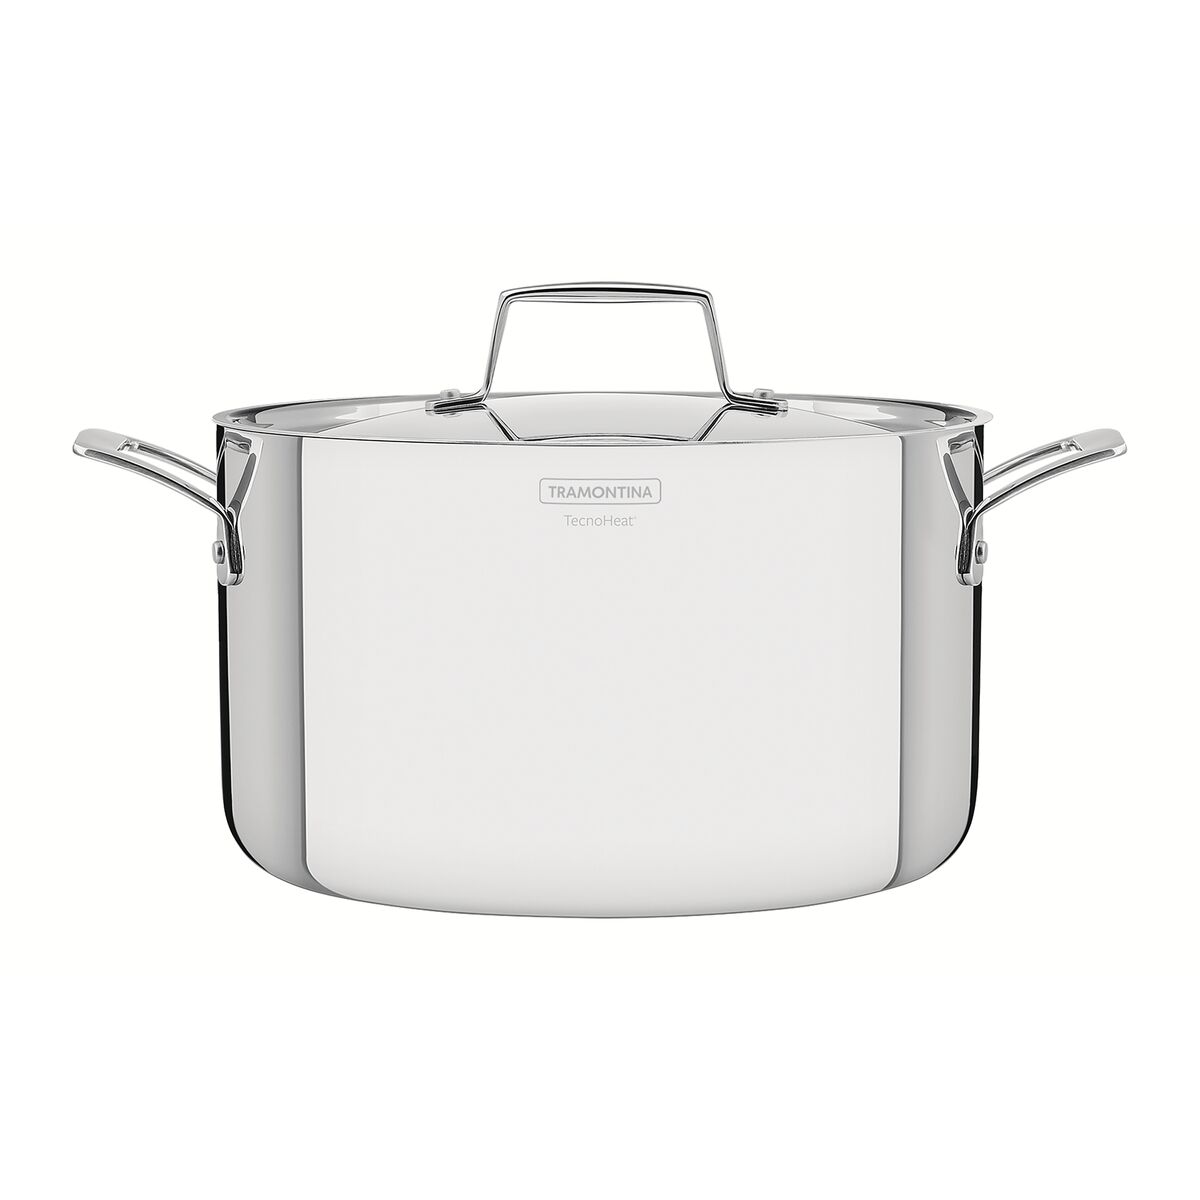 Tramontina Grano 24 cm 5,8 L stainless steel deep casserole dish with tri-ply body, lid and handles